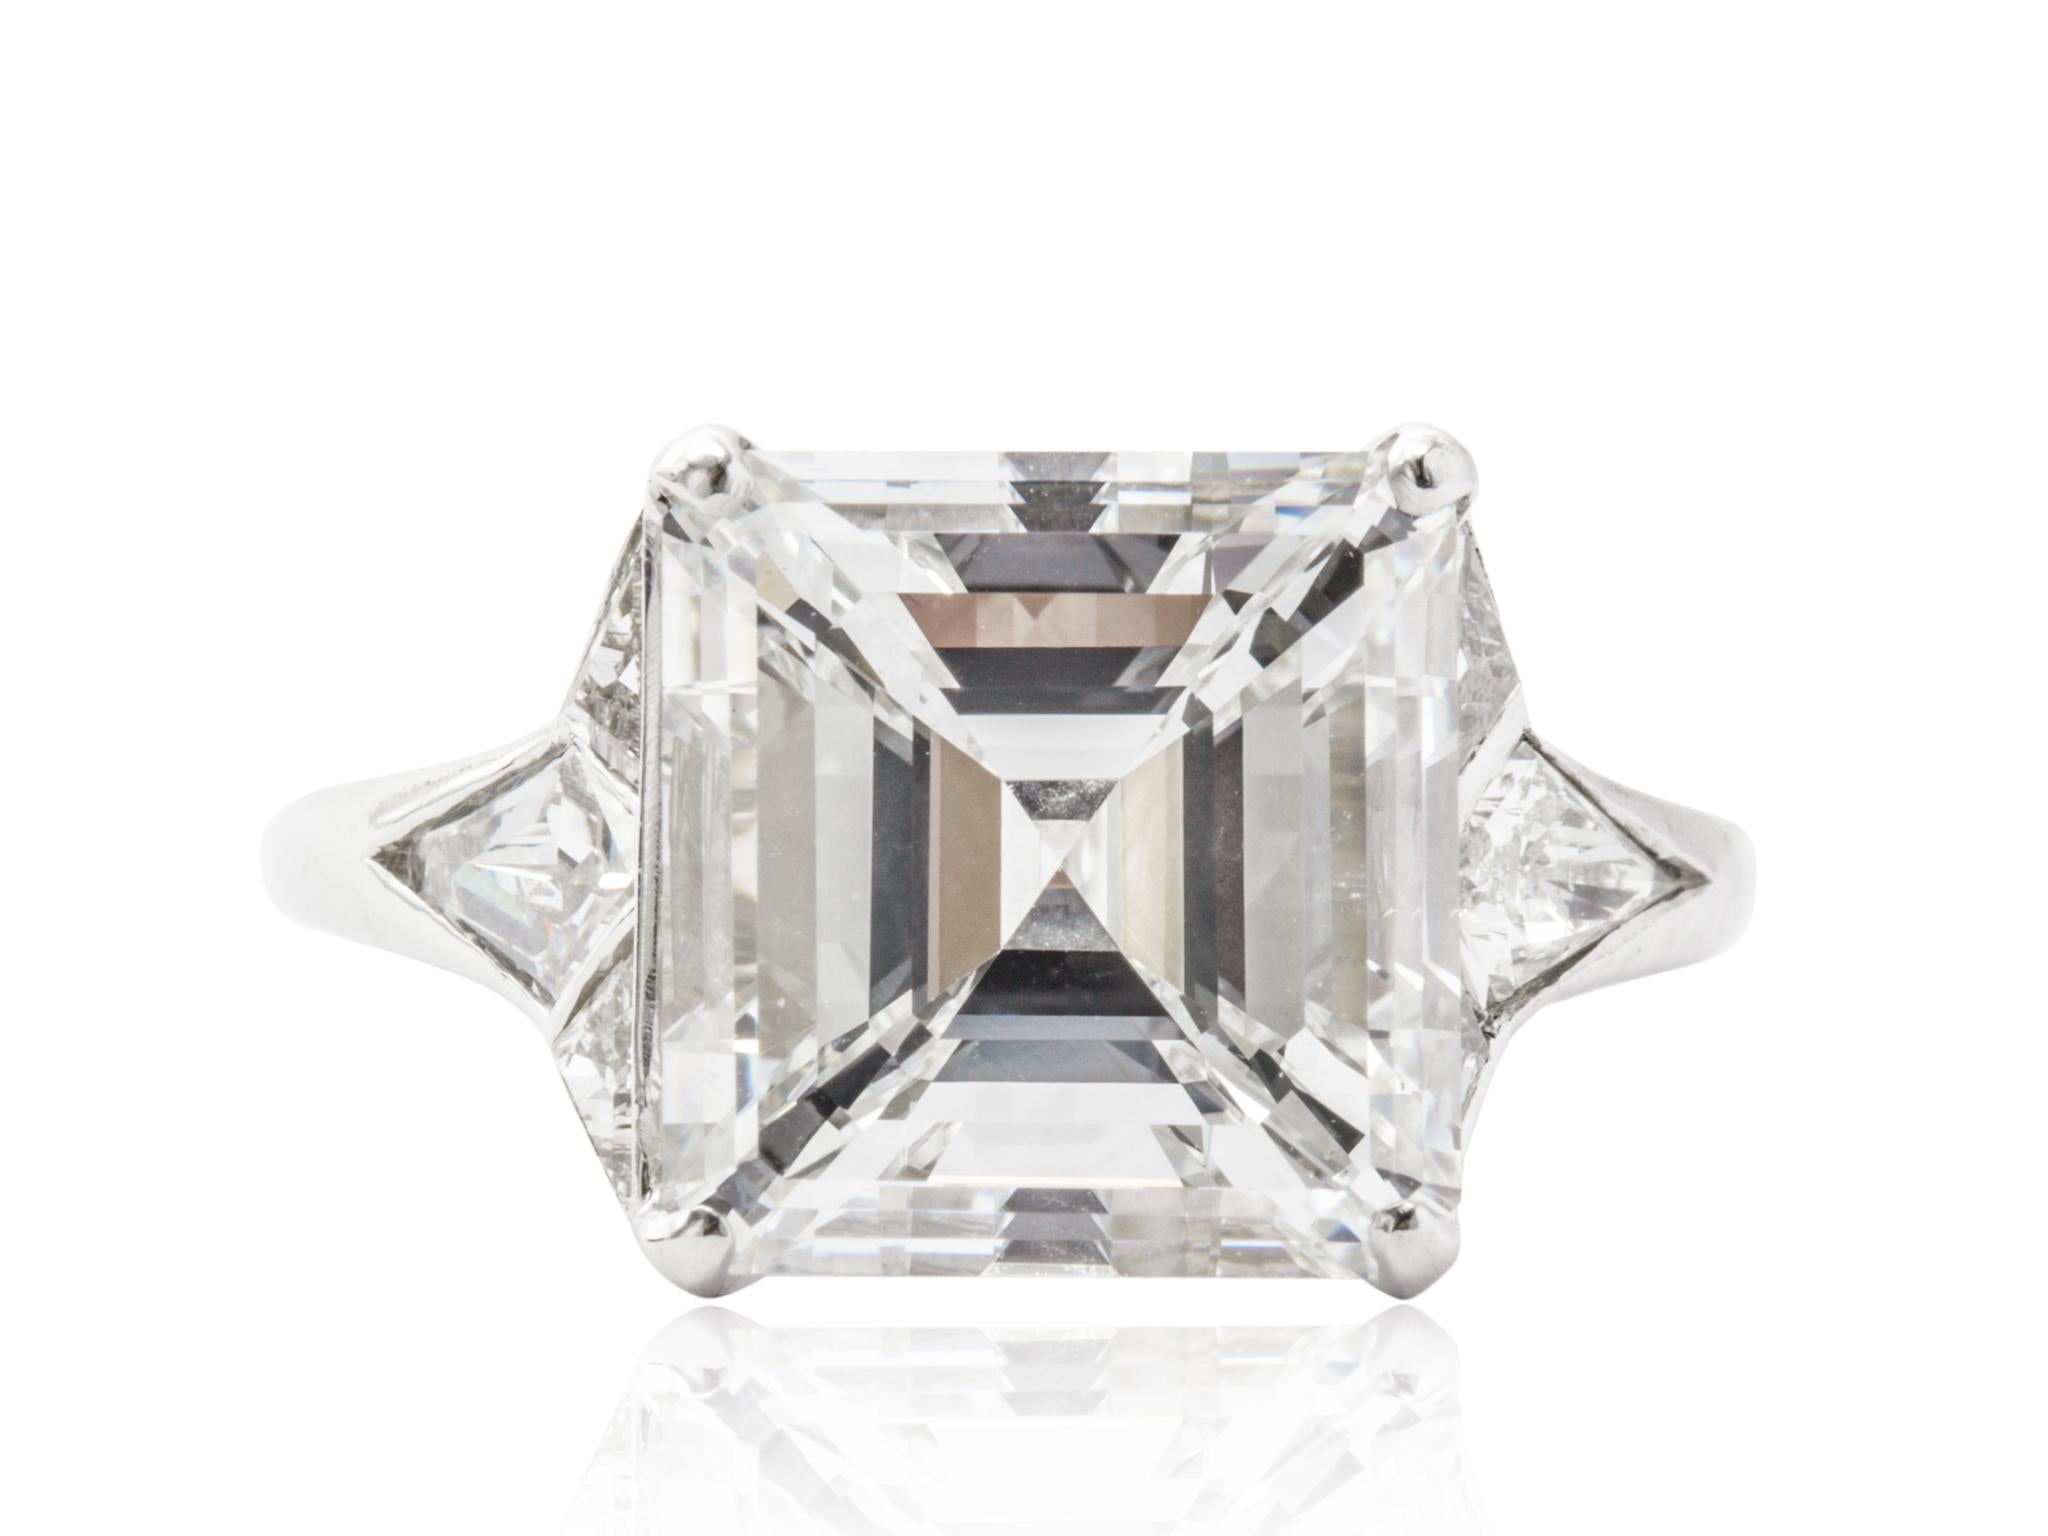 Platinum custom antique Asscher cut Diamond solitaire engagement. Consisting of one fine Asscher Diamond weighing 5.01 E VS2 accompanied by a GIA #12986323 flanked by antique cut kite shape diamonds.